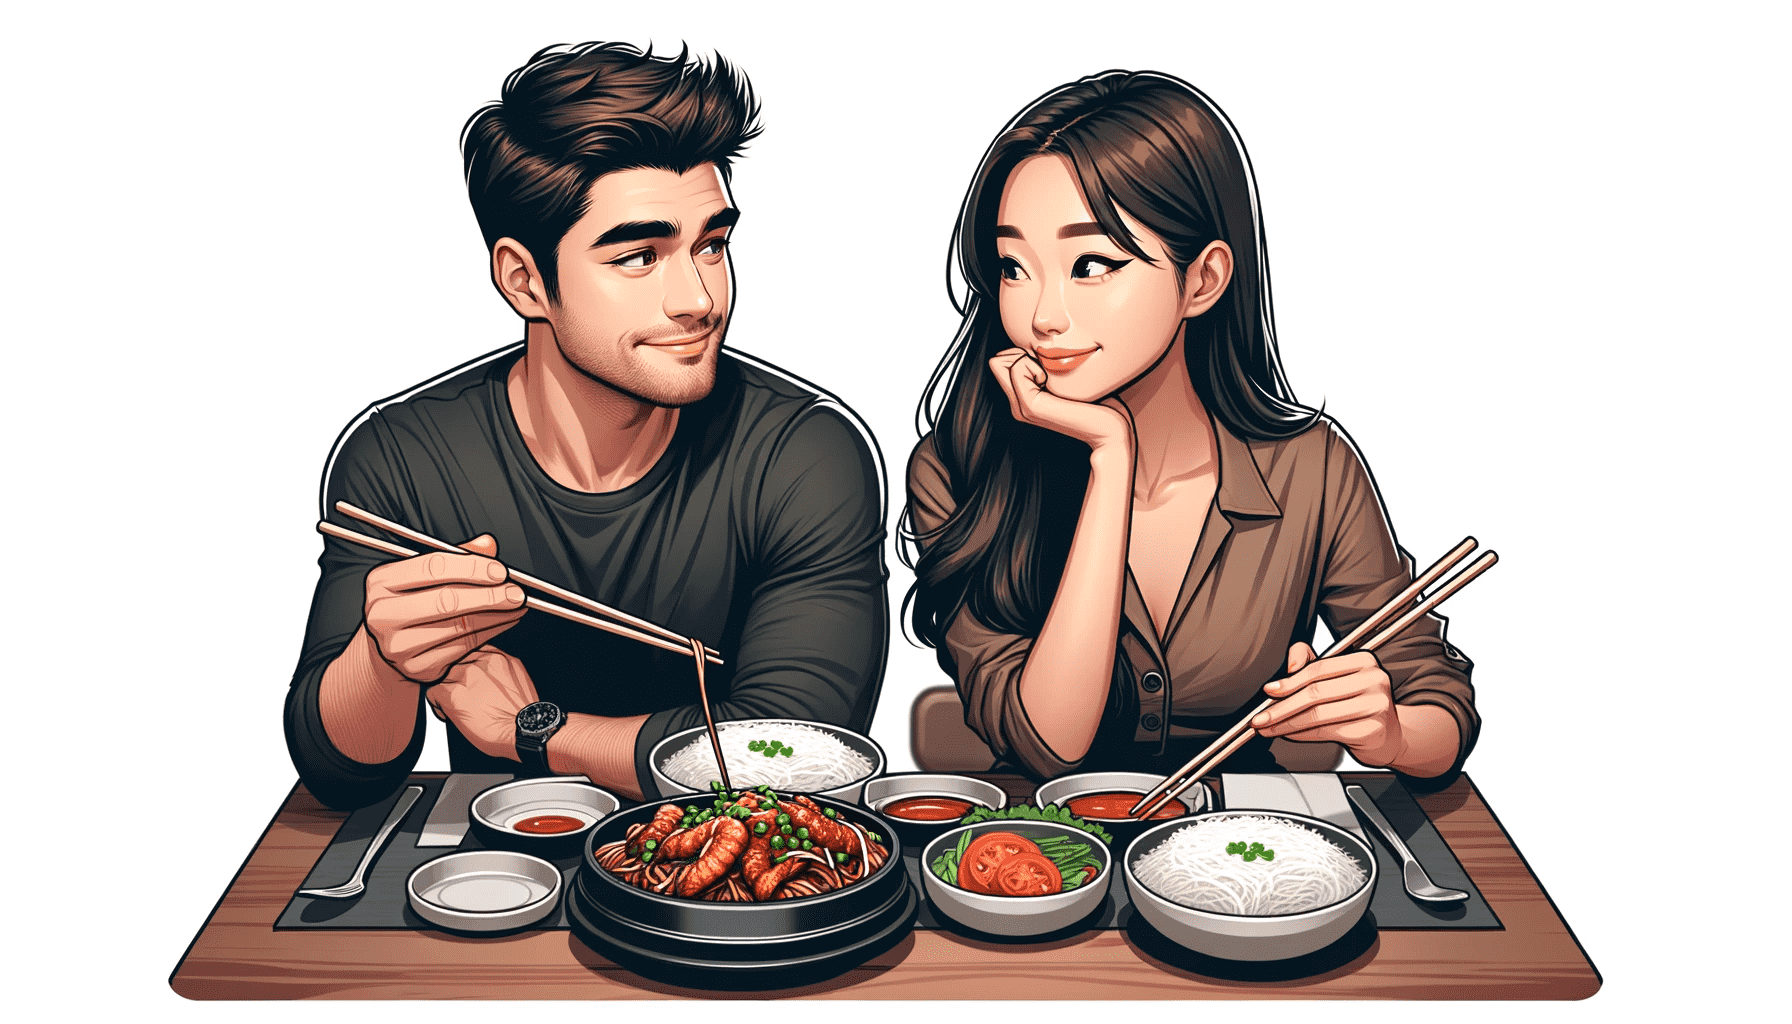 Asian woman and a man on a date